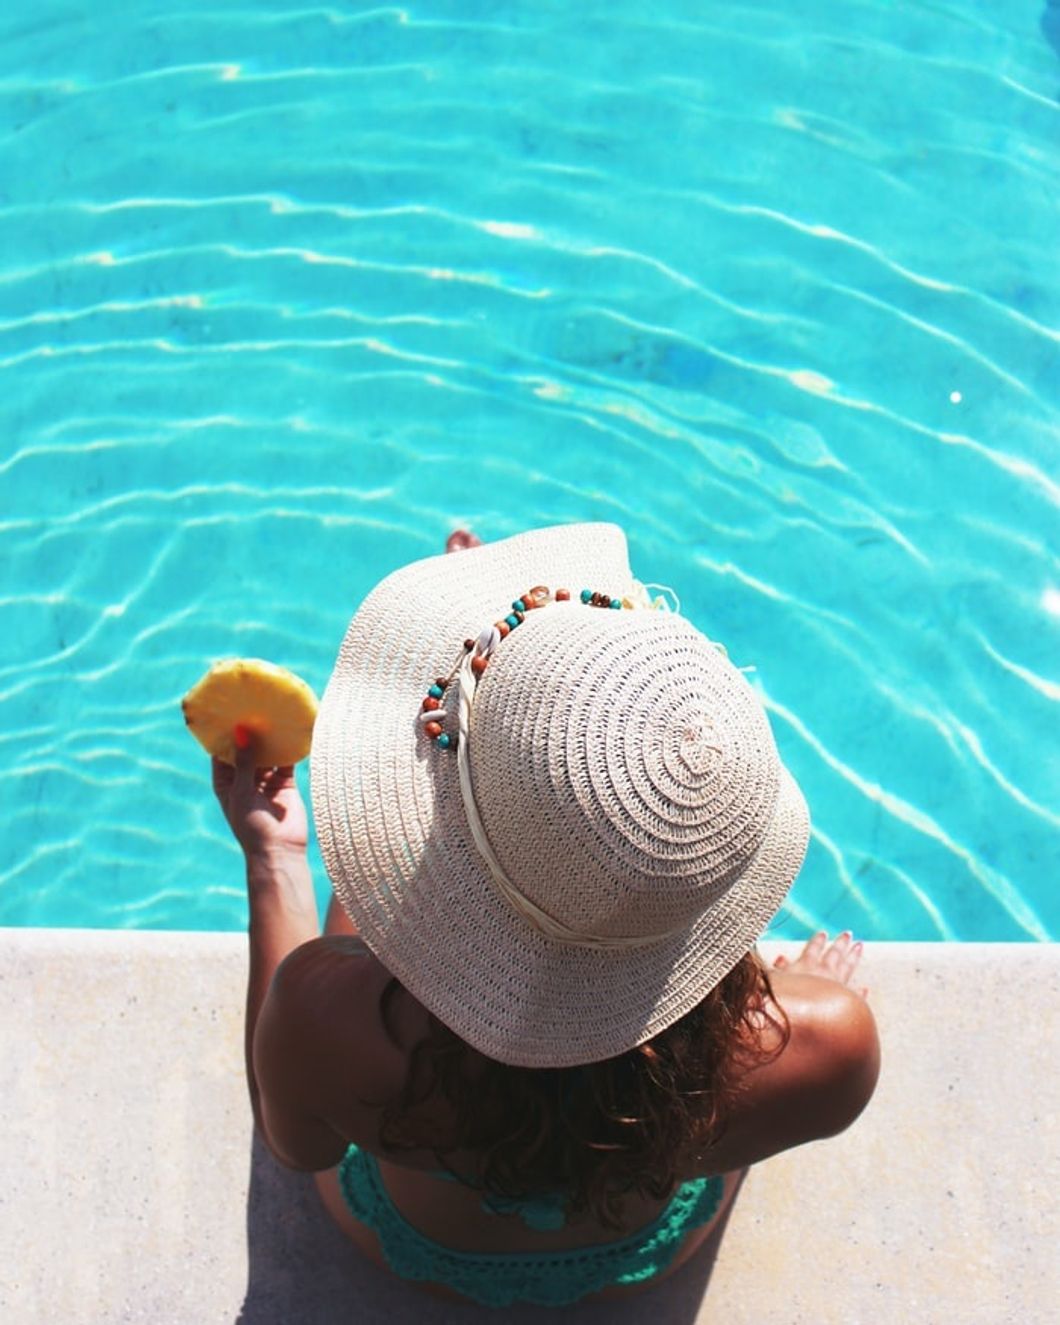 10 Things College Students Can Do This Summer If All Their Plans Have Been Cancelled